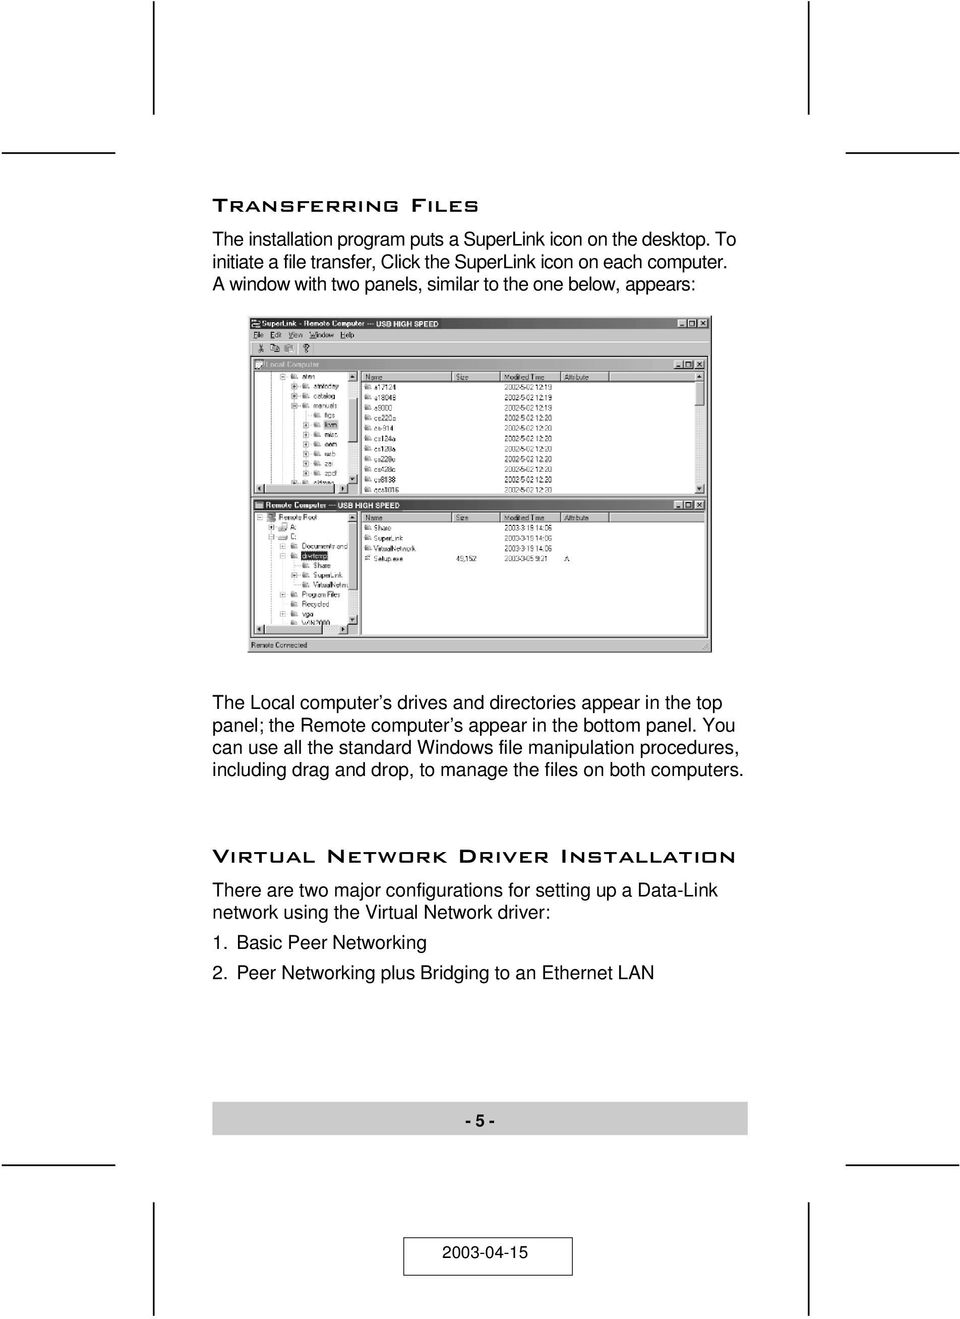 bottom panel. You can use all the standard Windows file manipulation procedures, including drag and drop, to manage the files on both computers.